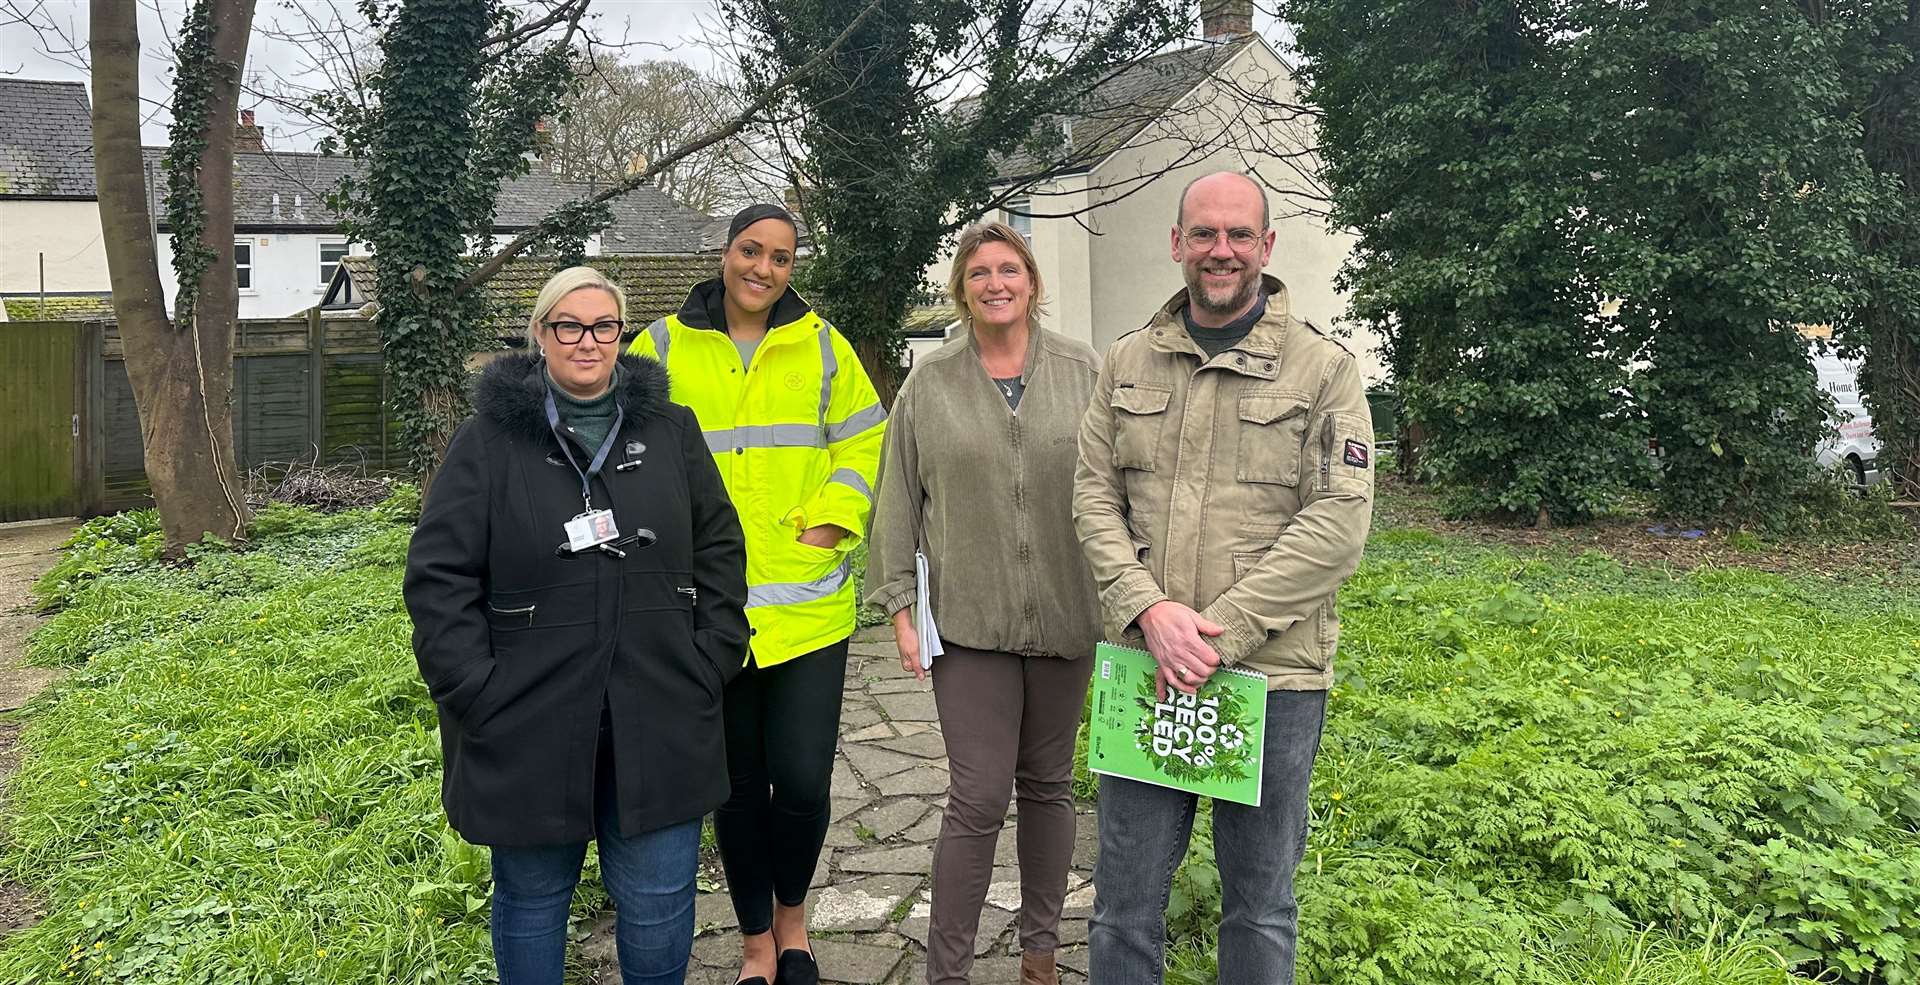 From left, Danielle Morgana and Naomi Grant, both of The Arch Company, with Sam Phillips and Stuart Bourne, both from Involve Kent at the site off Woollett Street, Maidstone